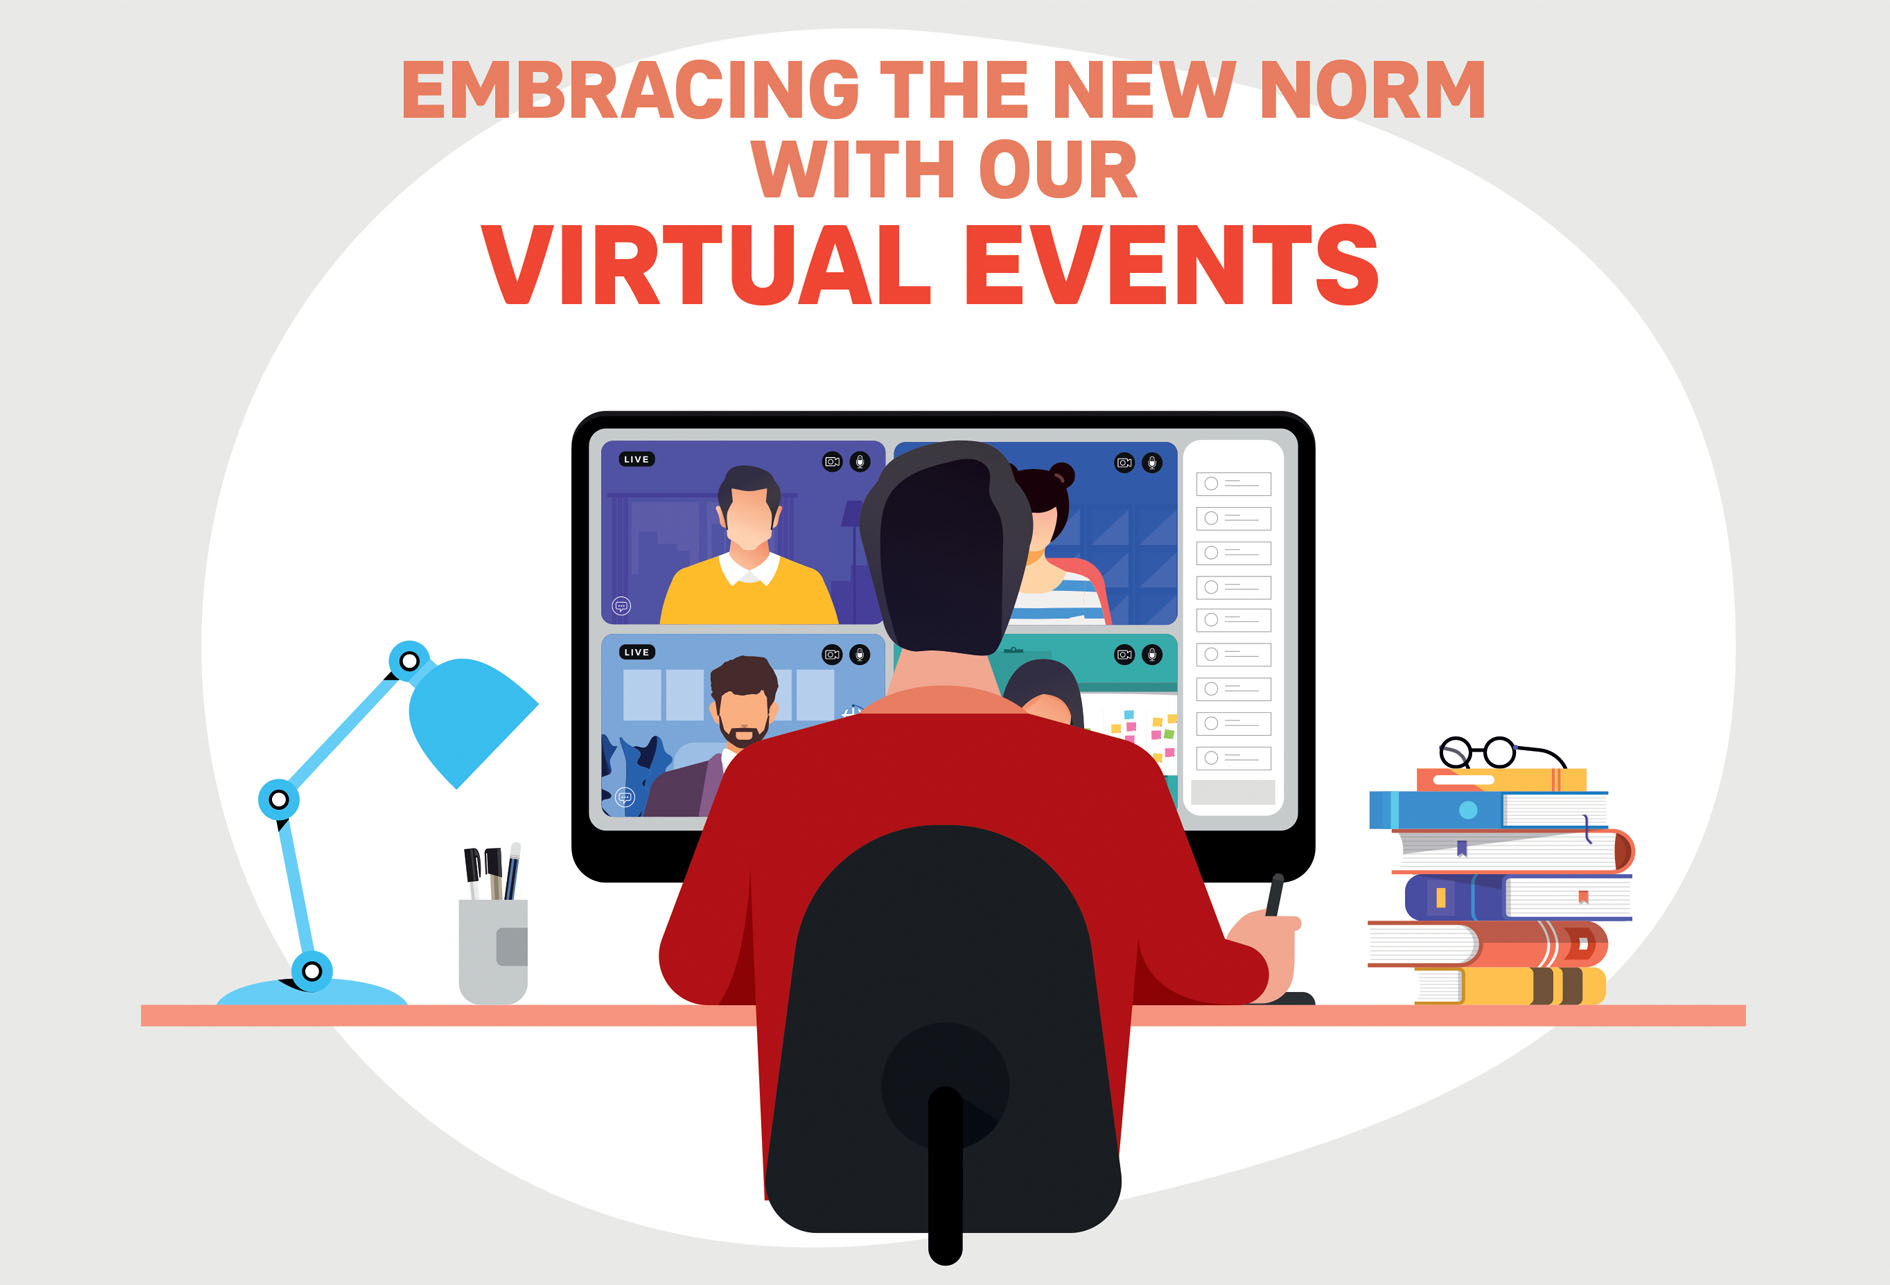 Embracing the new norm with our virtual events